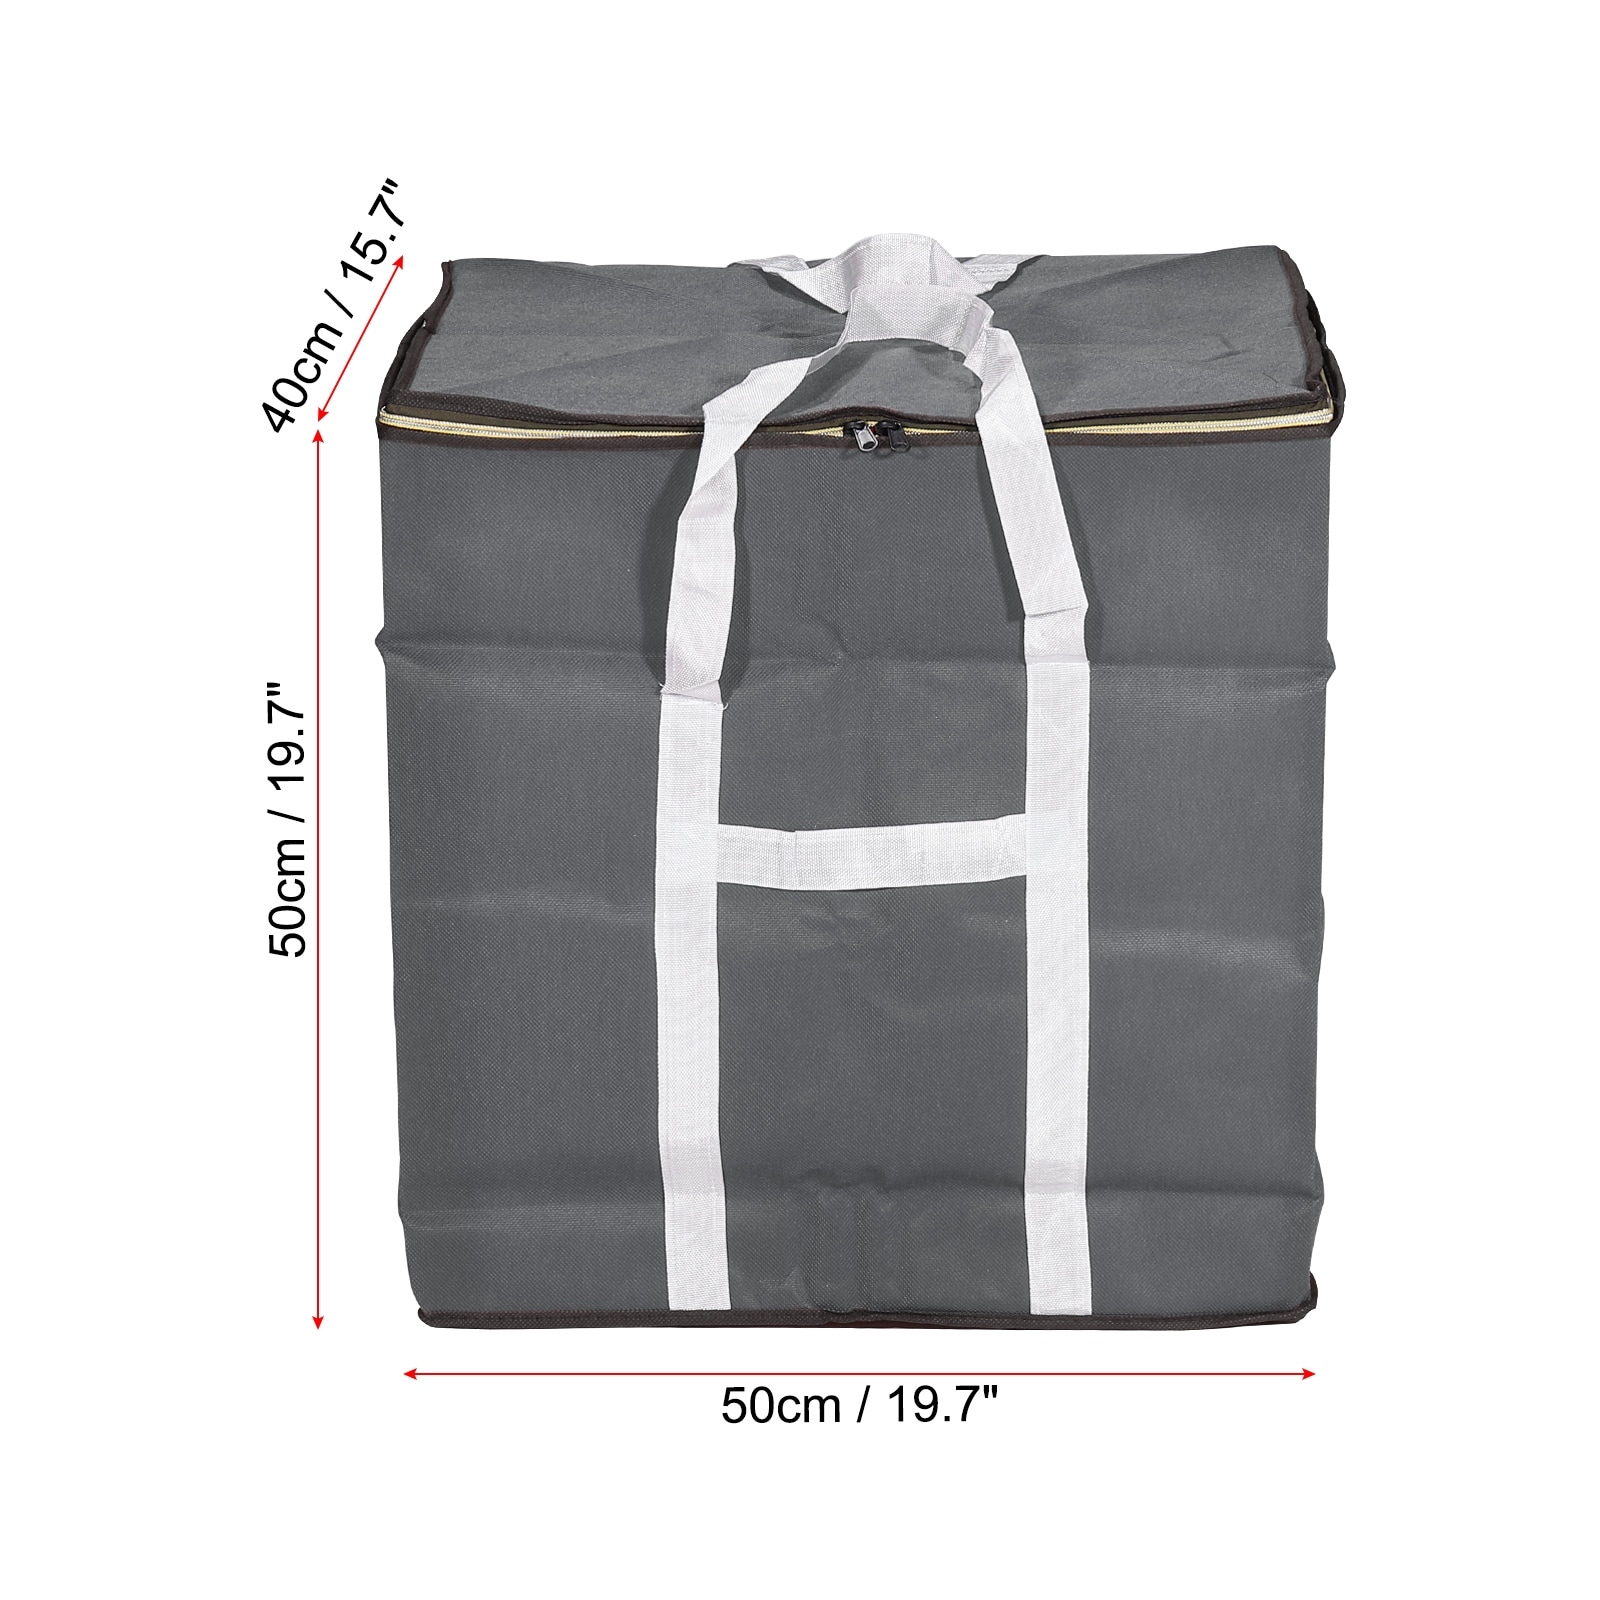 https://ak1.ostkcdn.com/images/products/is/images/direct/145ecc30eee702bbb3e9e5fcfc7d90396df467d1/Storage-Tote-with-Zippers%2C-19.7%22-L-Heavy-Moving-Tote-Bags-for-Bedding.jpg